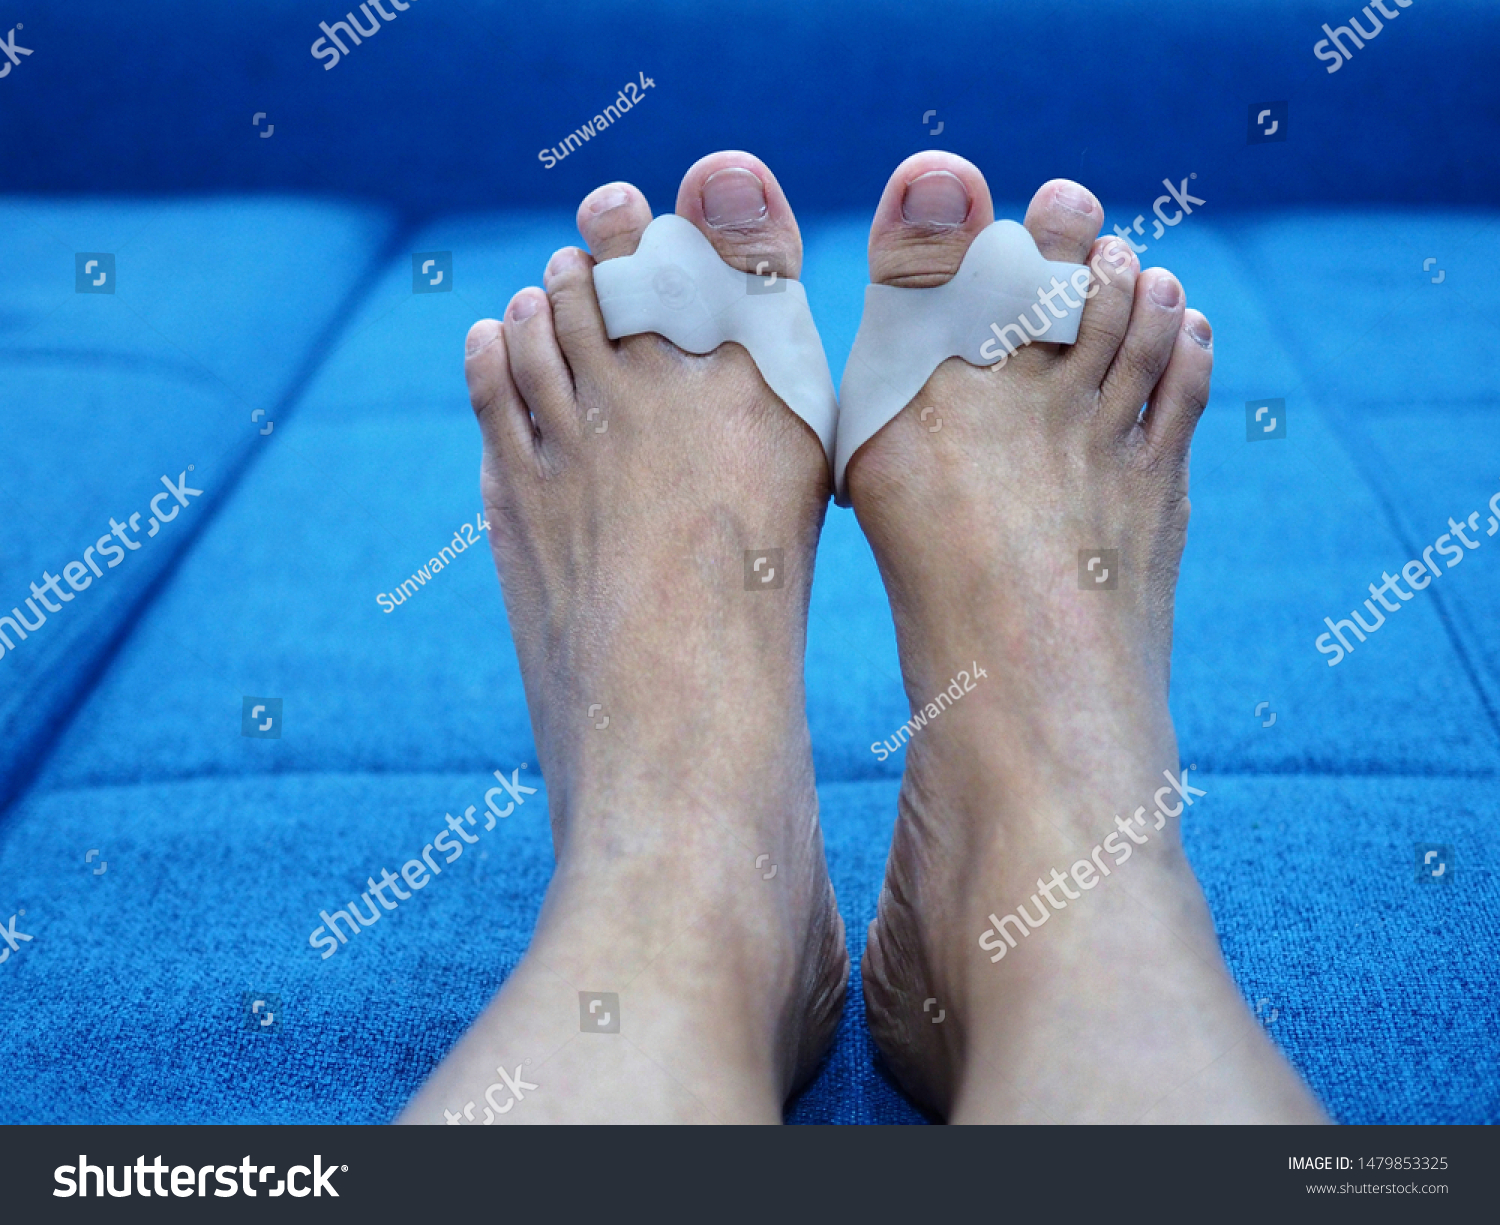 Bare foots which have Hallux Valgus (bunion) problem on blue sofa bed. A deformity of the joint connecting the big toe to the foot and caused painful. #1479853325